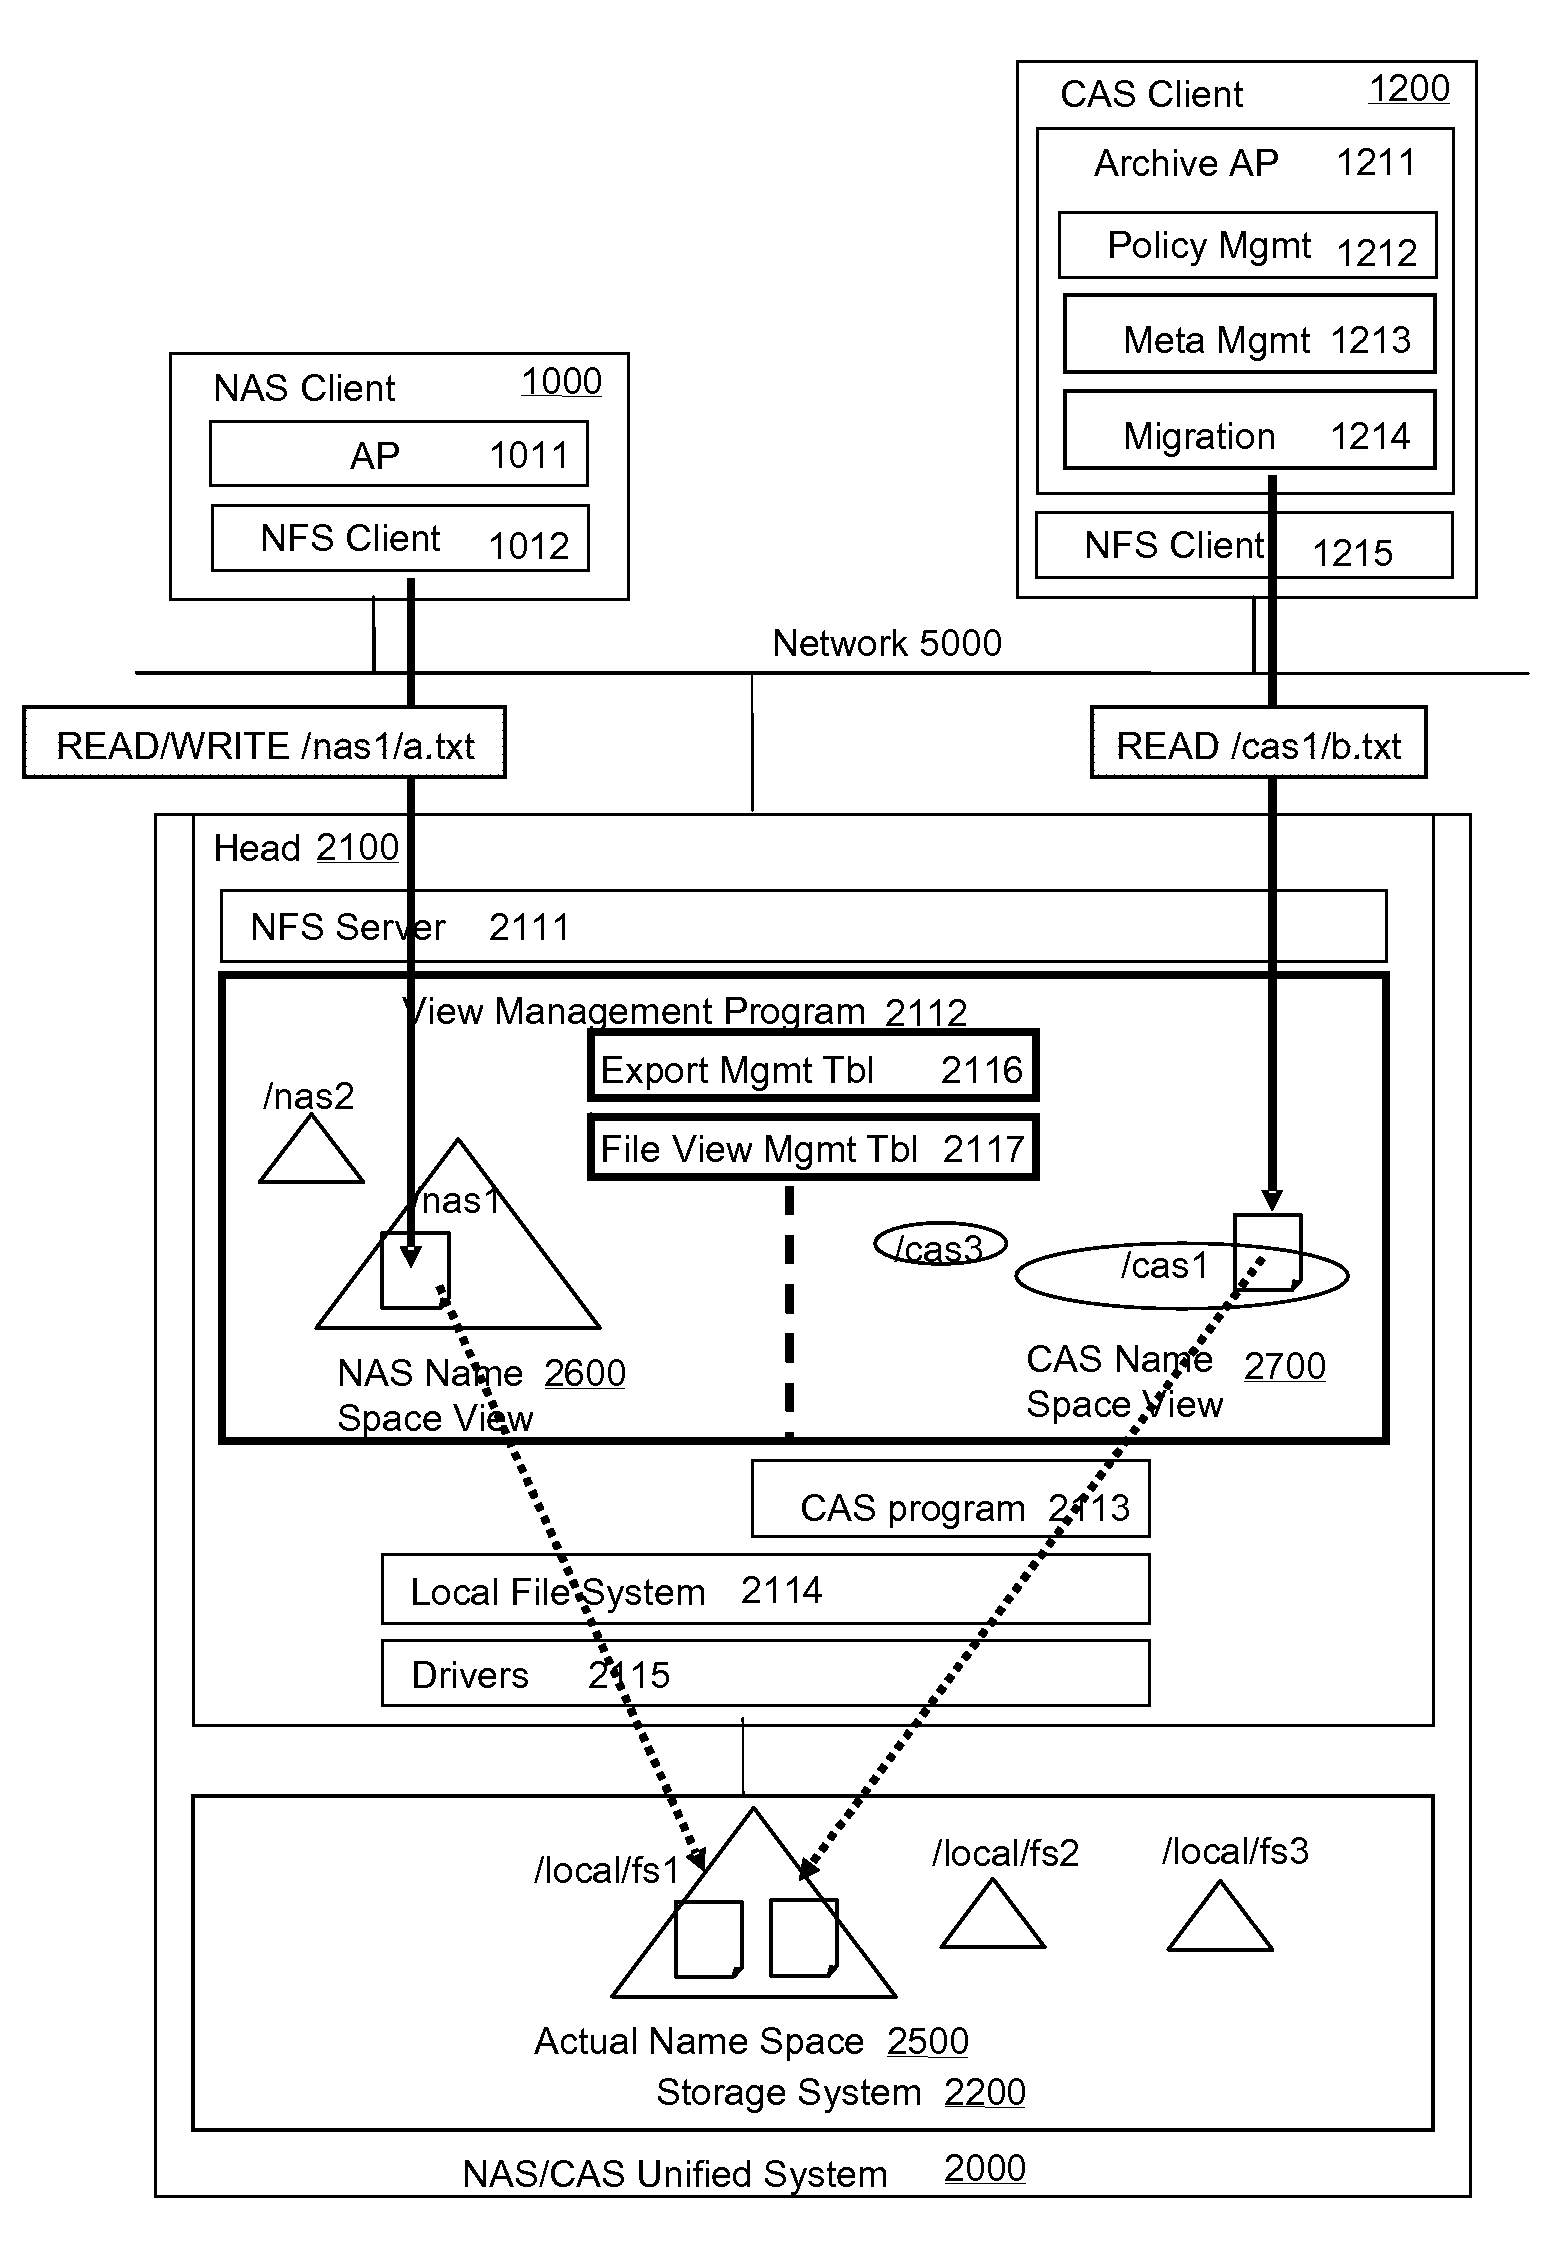 Method and apparatus for NAS/CAS unified storage system